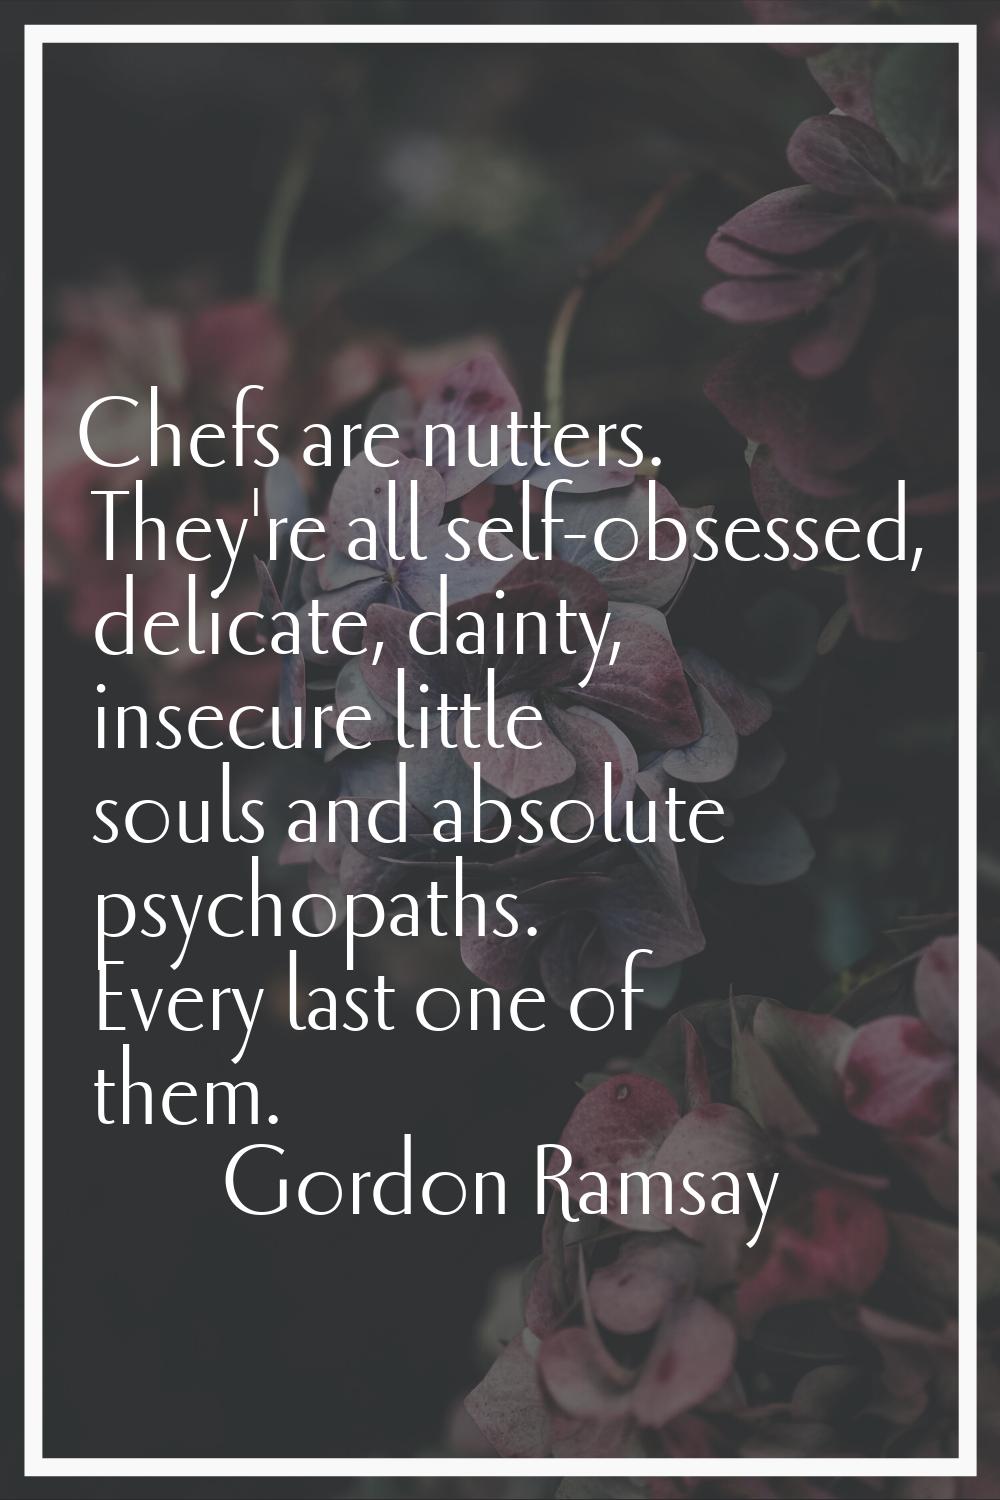 Chefs are nutters. They're all self-obsessed, delicate, dainty, insecure little souls and absolute 